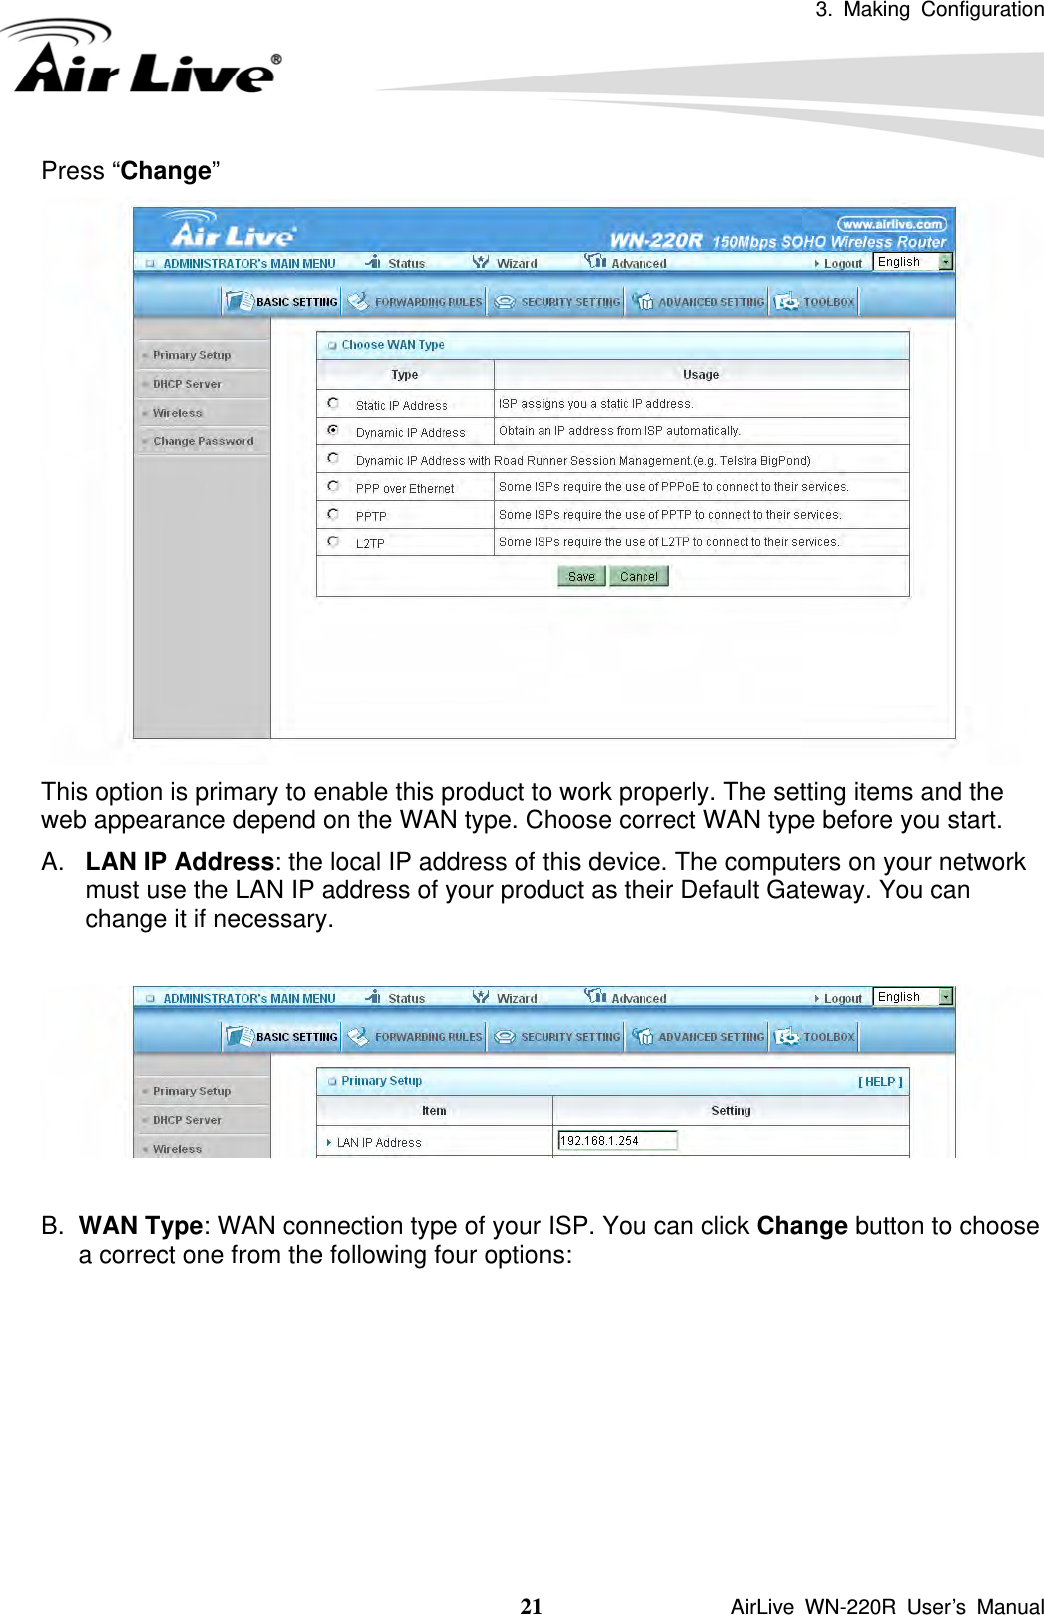 3. Making Configuration  21               AirLive WN-220R User’s Manual Press “Change”  This option is primary to enable this product to work properly. The setting items and the web appearance depend on the WAN type. Choose correct WAN type before you start. A.  LAN IP Address: the local IP address of this device. The computers on your network must use the LAN IP address of your product as their Default Gateway. You can change it if necessary.    B.  WAN Type: WAN connection type of your ISP. You can click Change button to choose a correct one from the following four options:        